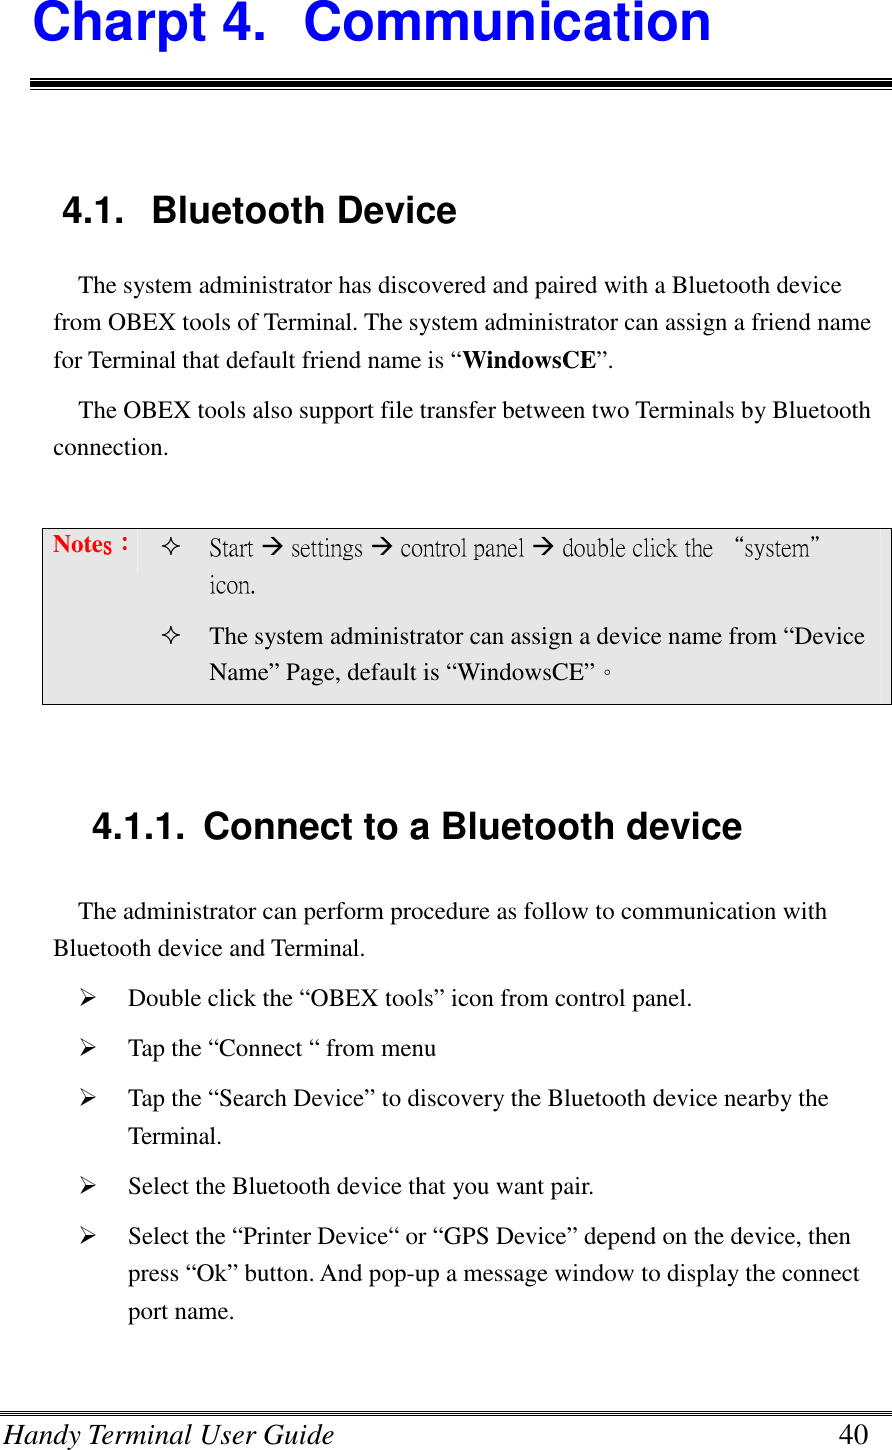 Handy Terminal User Guide      40 Charpt 4.  Communication  4.1.  Bluetooth Device The system administrator has discovered and paired with a Bluetooth device from OBEX tools of Terminal. The system administrator can assign a friend name for Terminal that default friend name is “WindowsCE”.   The OBEX tools also support file transfer between two Terminals by Bluetooth connection.  Notessss：：：：  Start  settings  control panel  double click the “system” icon.  The system administrator can assign a device name from “Device Name” Page, default is “WindowsCE”。   4.1.1.  Connect to a Bluetooth device The administrator can perform procedure as follow to communication with   Bluetooth device and Terminal.  Double click the “OBEX tools” icon from control panel.  Tap the “Connect “ from menu  Tap the “Search Device” to discovery the Bluetooth device nearby the Terminal.  Select the Bluetooth device that you want pair.  Select the “Printer Device“ or “GPS Device” depend on the device, then press “Ok” button. And pop-up a message window to display the connect port name.  